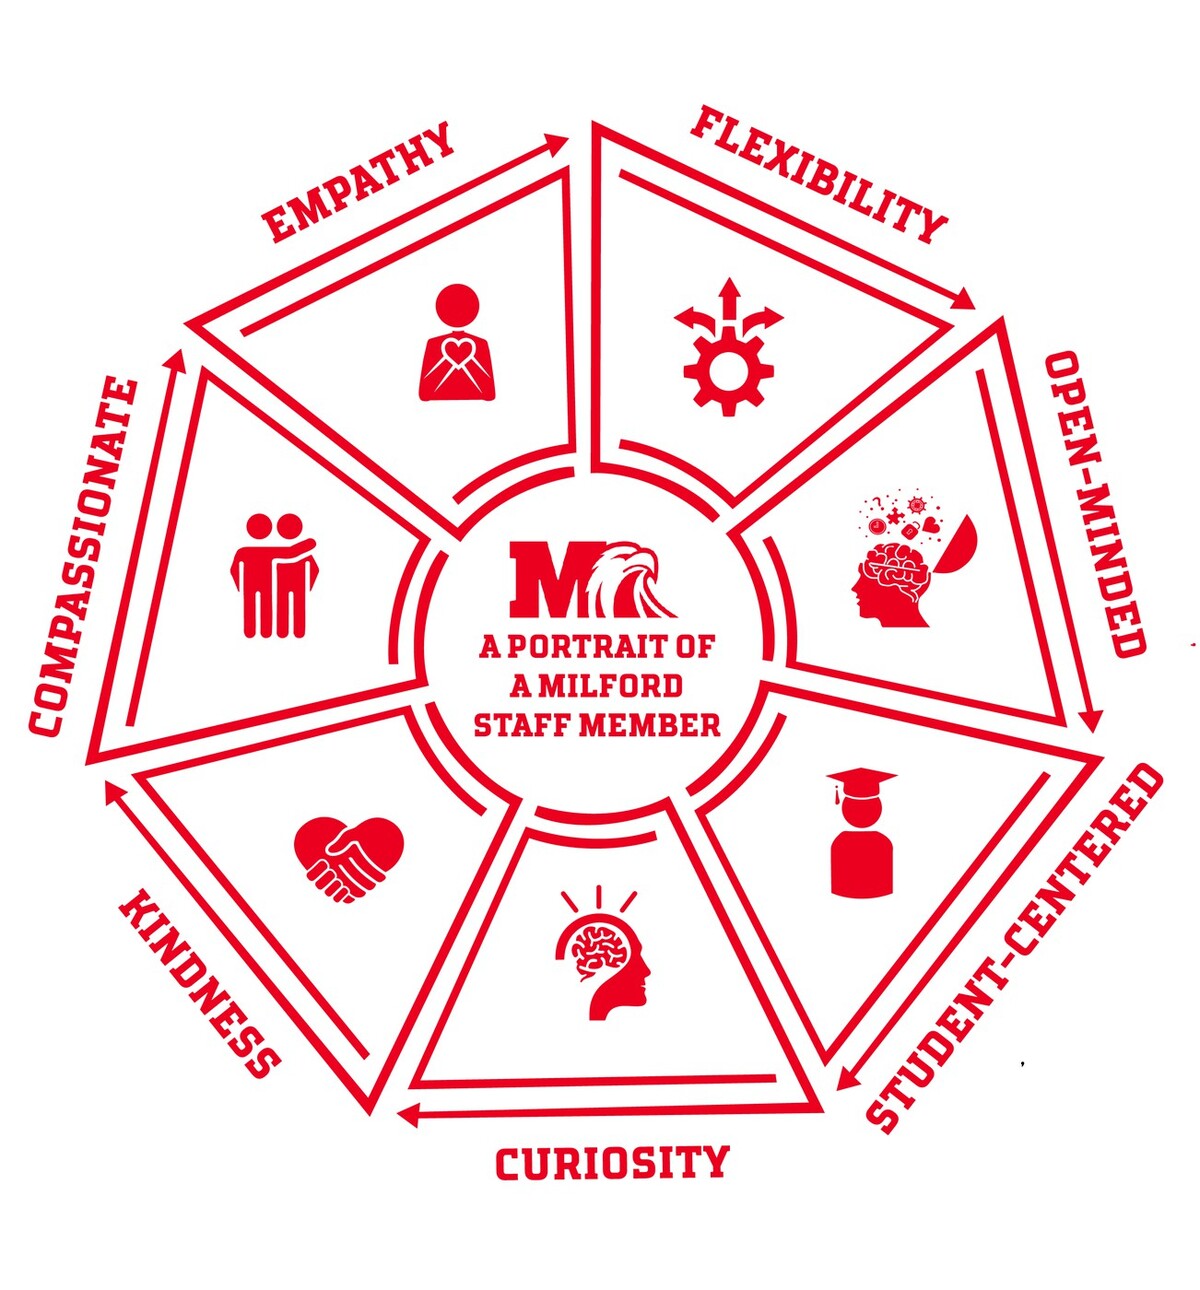 Milford Staff Members exemplify Kindness, Compassion, Empathy, Flexibility, Open-mindedness, are Student Centered, and Curious 